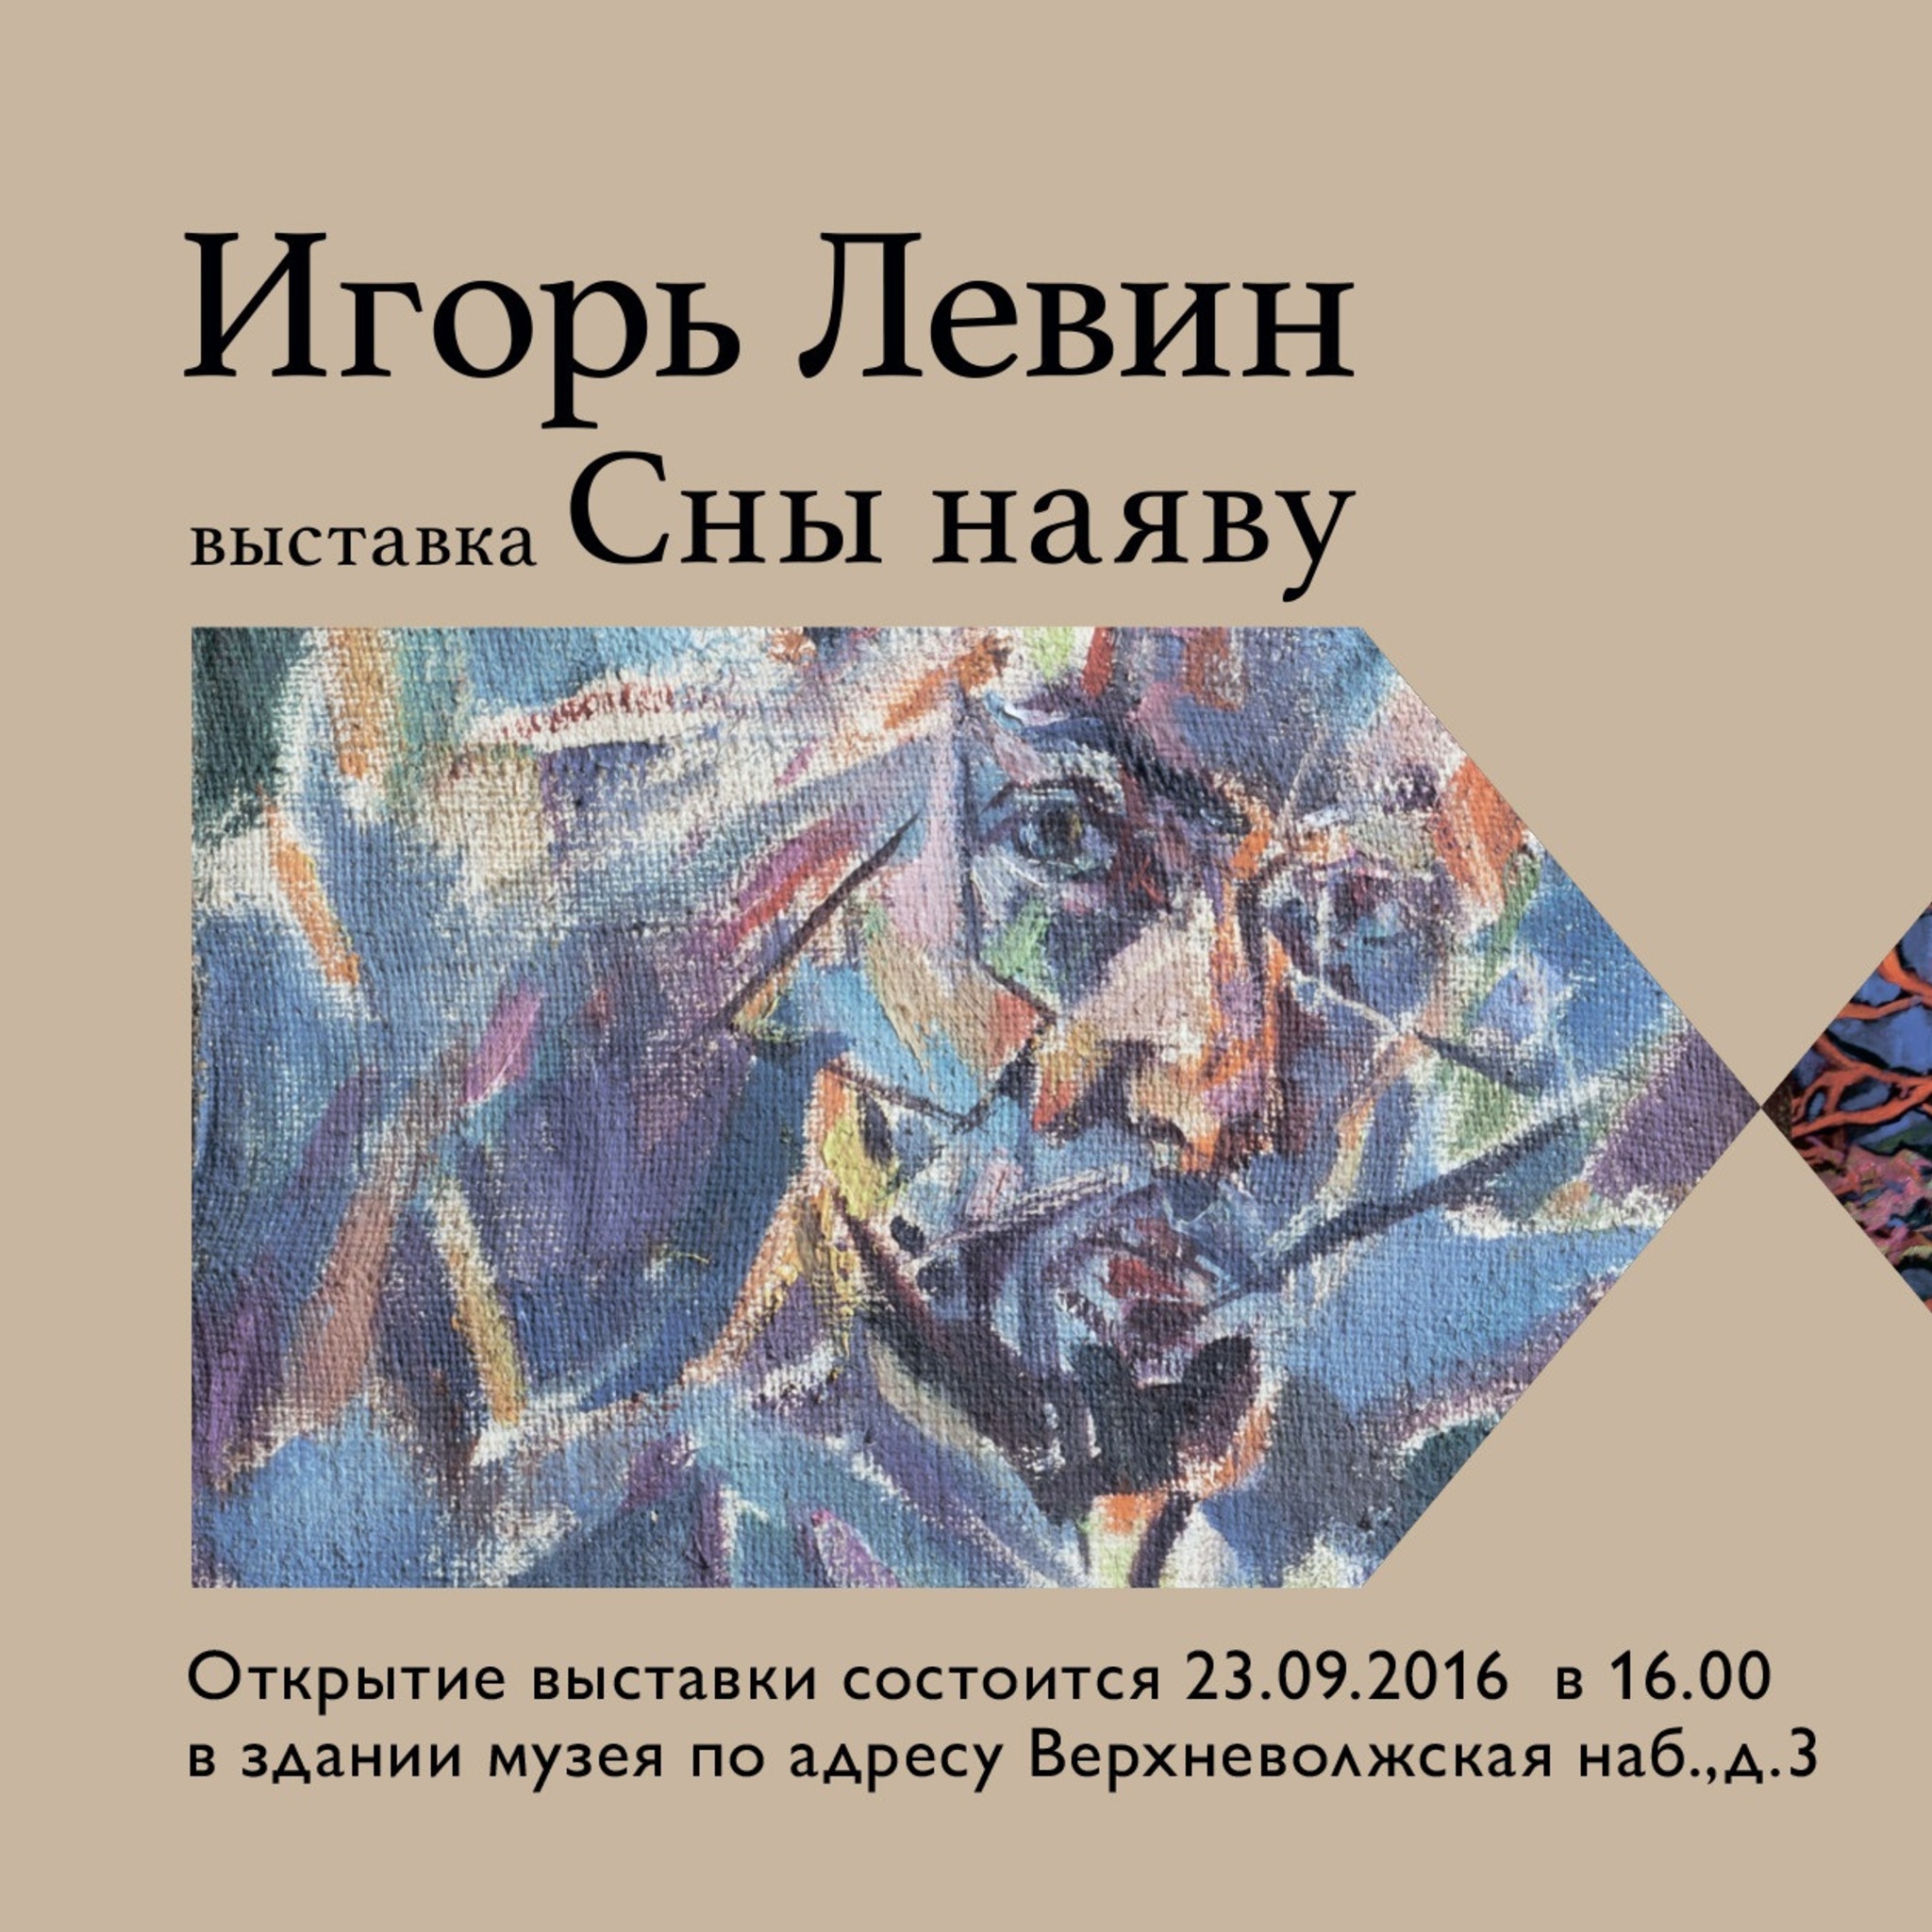 Exhibition of paintings by the famous painter of the Nizhny Novgorod Igor Levin, daydreaming